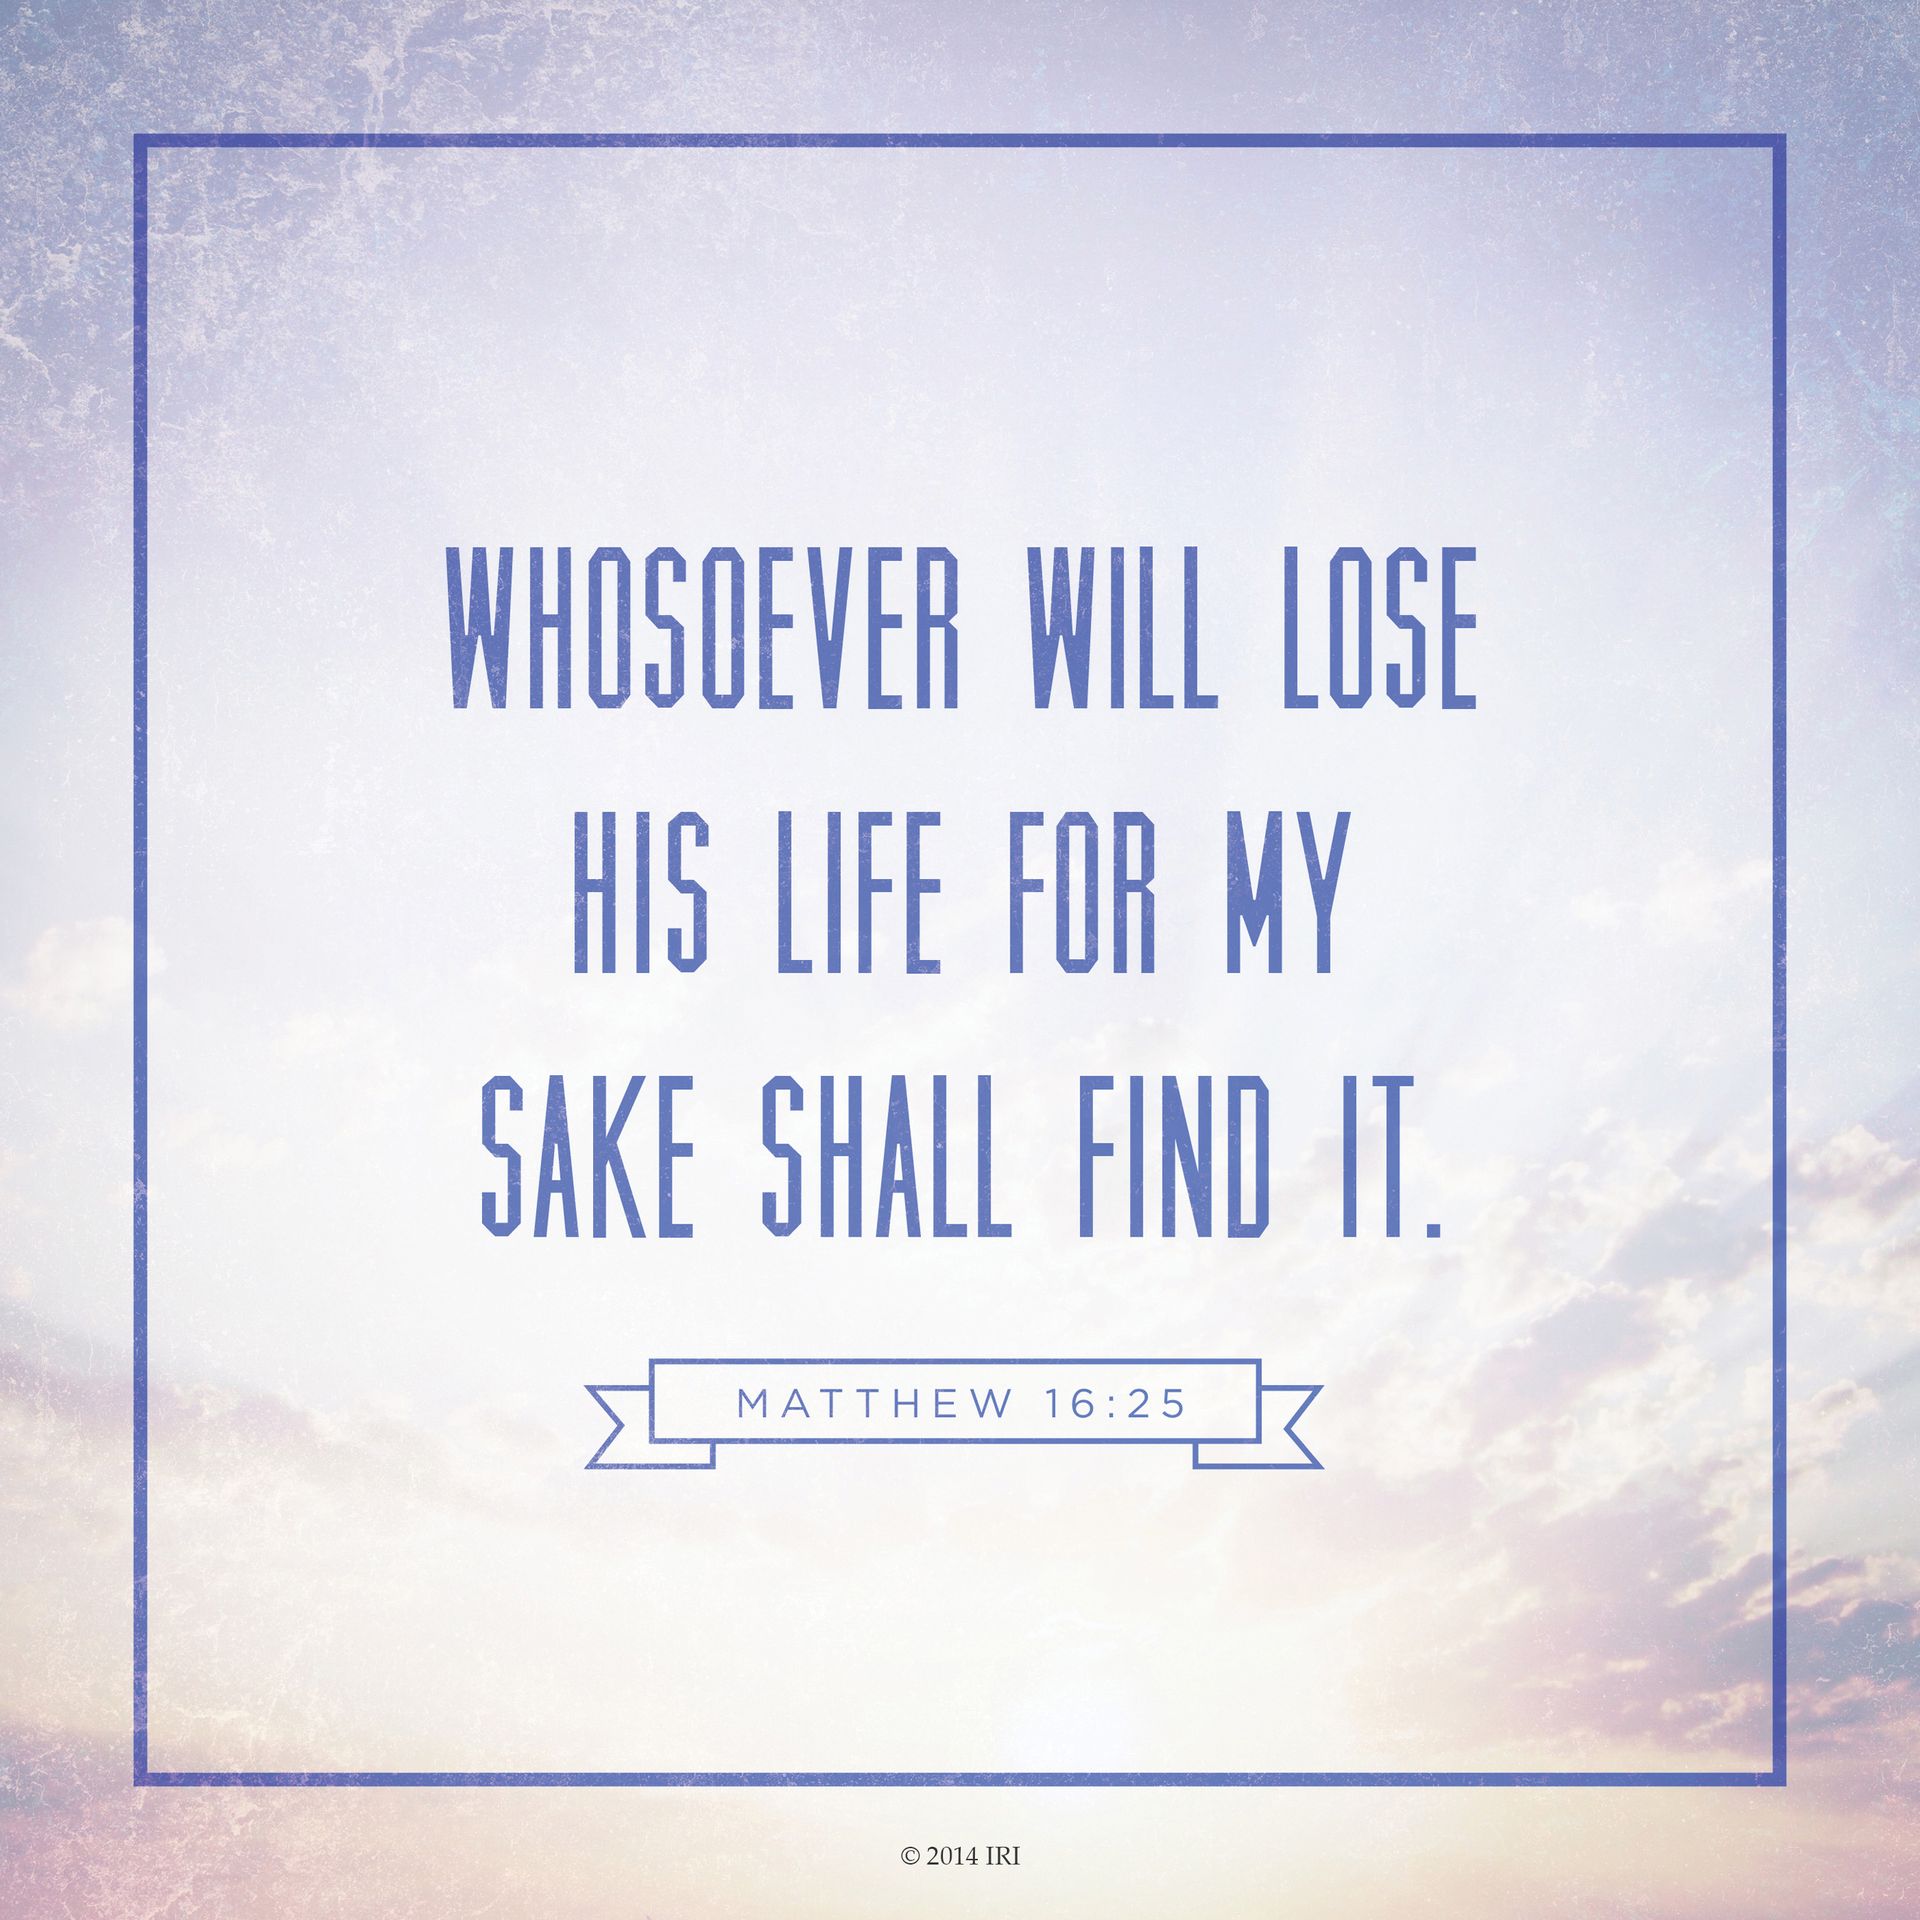 “Whosoever will lose his life for my sake shall find it.”—Matthew 16:25